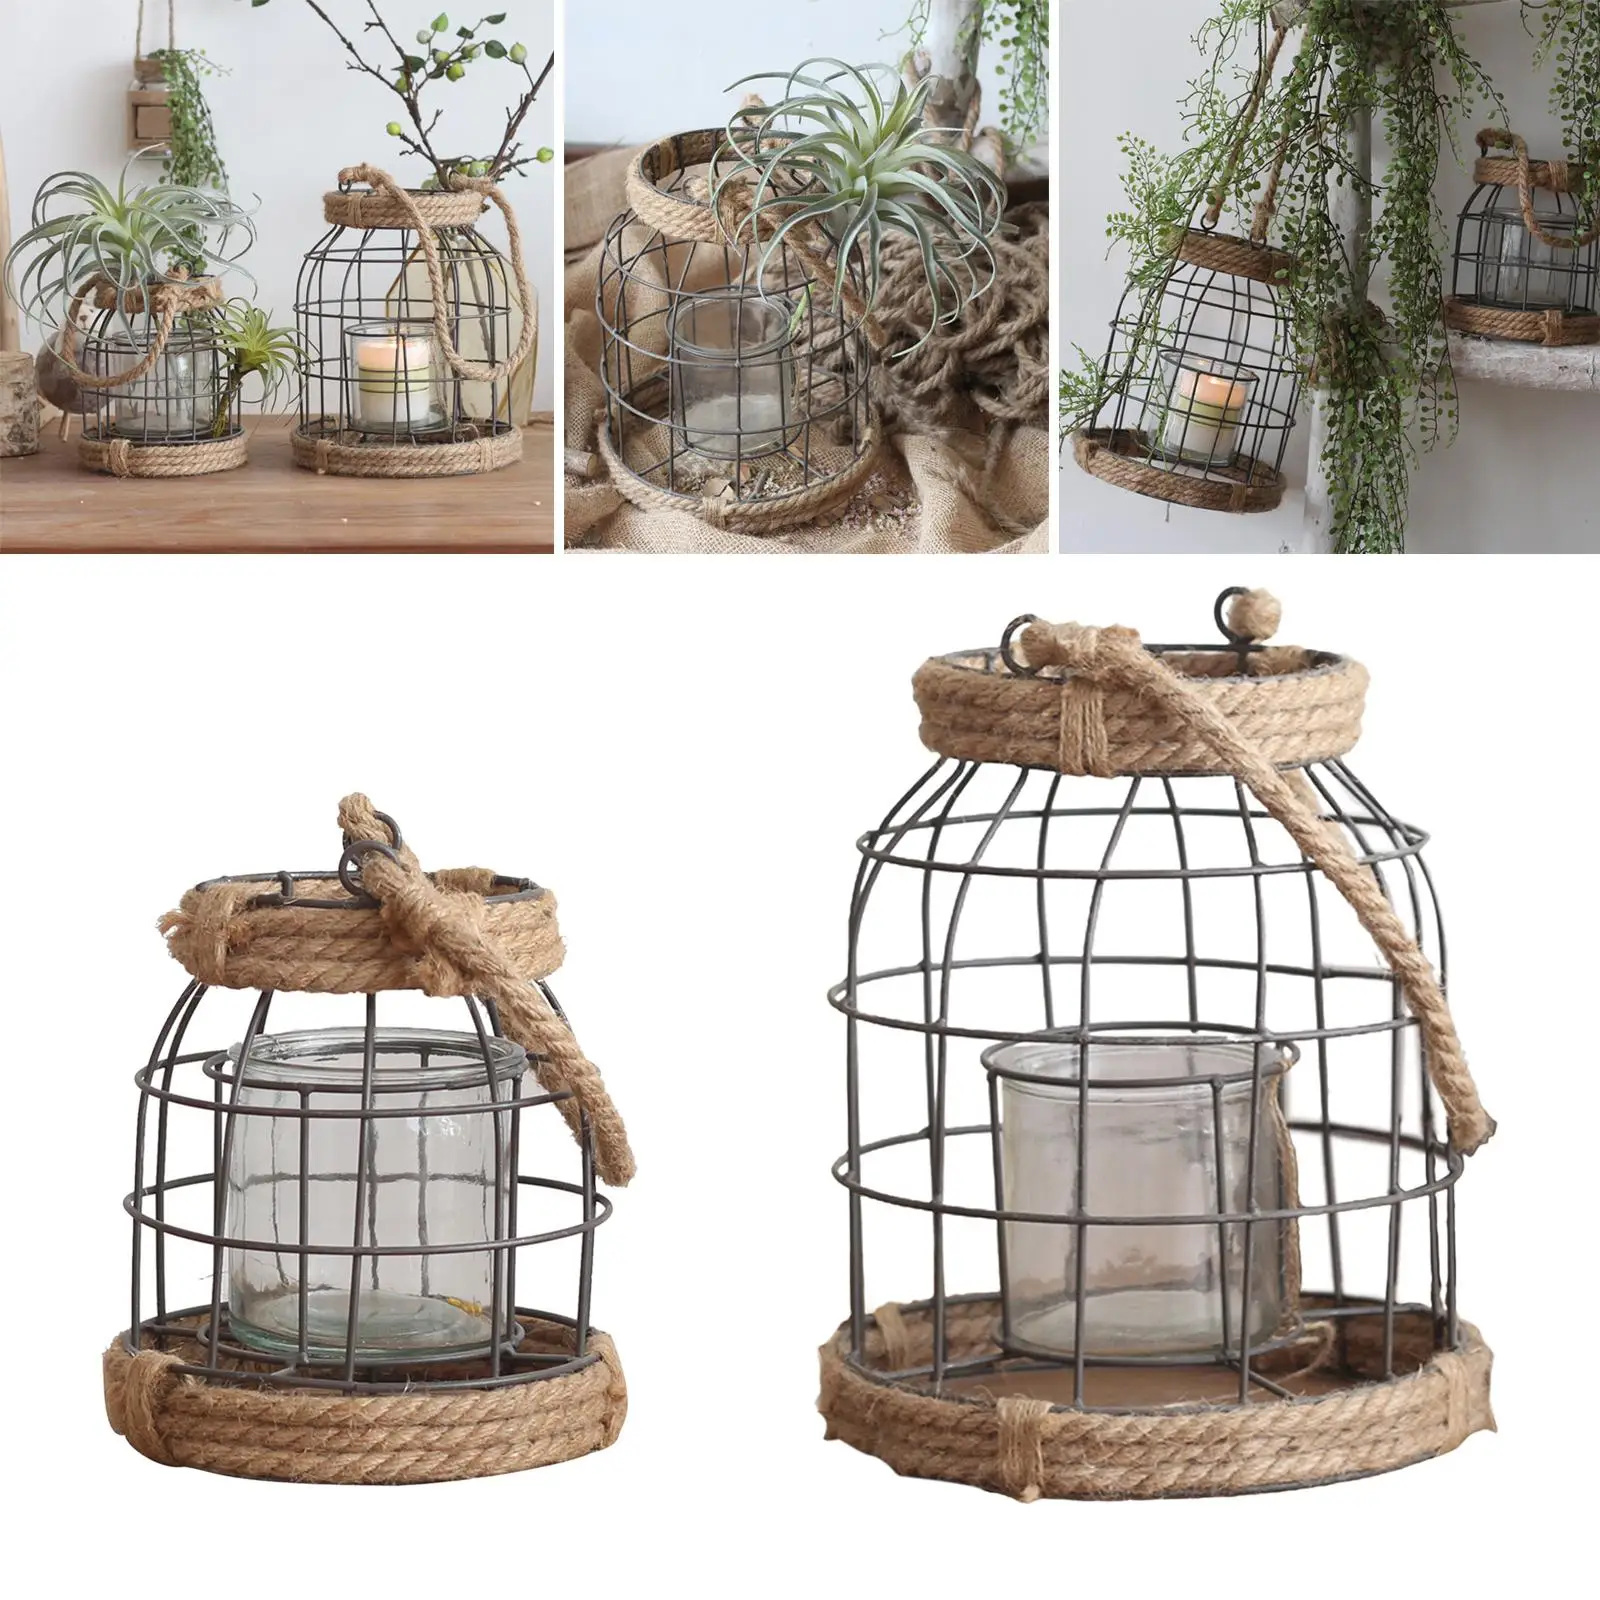 Decorative Metal and Rope Lantern Candle Holder, Rustic Outdoor Floor or Table Lantern for Farmhouse Patio Decor